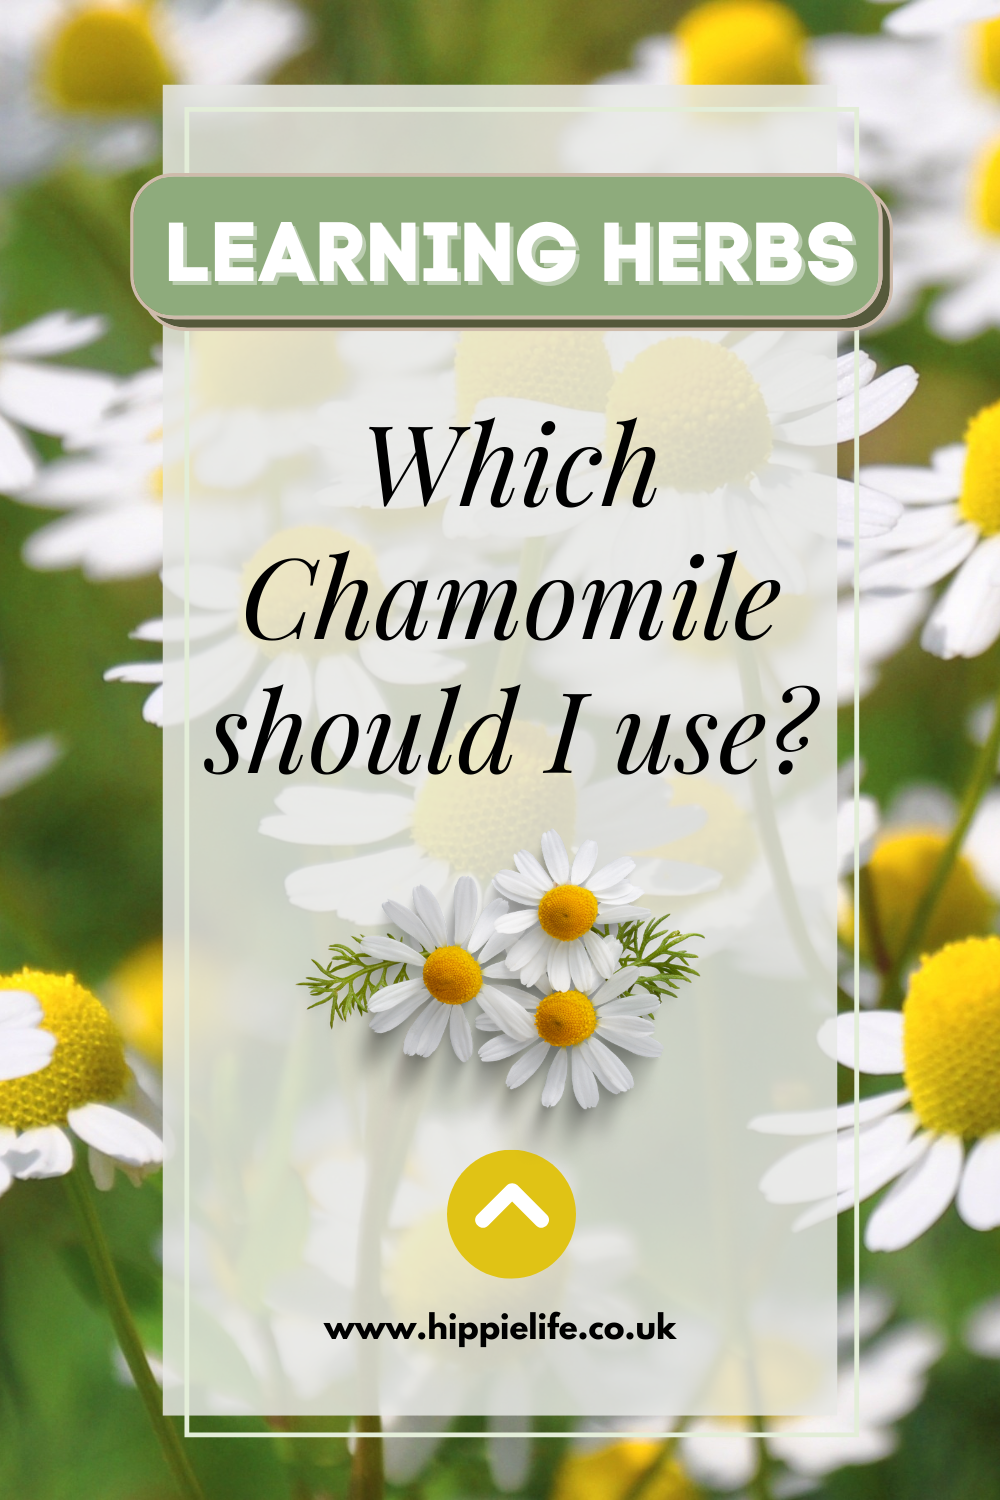 What is the difference between Roman Chamomile and German Chamomile?